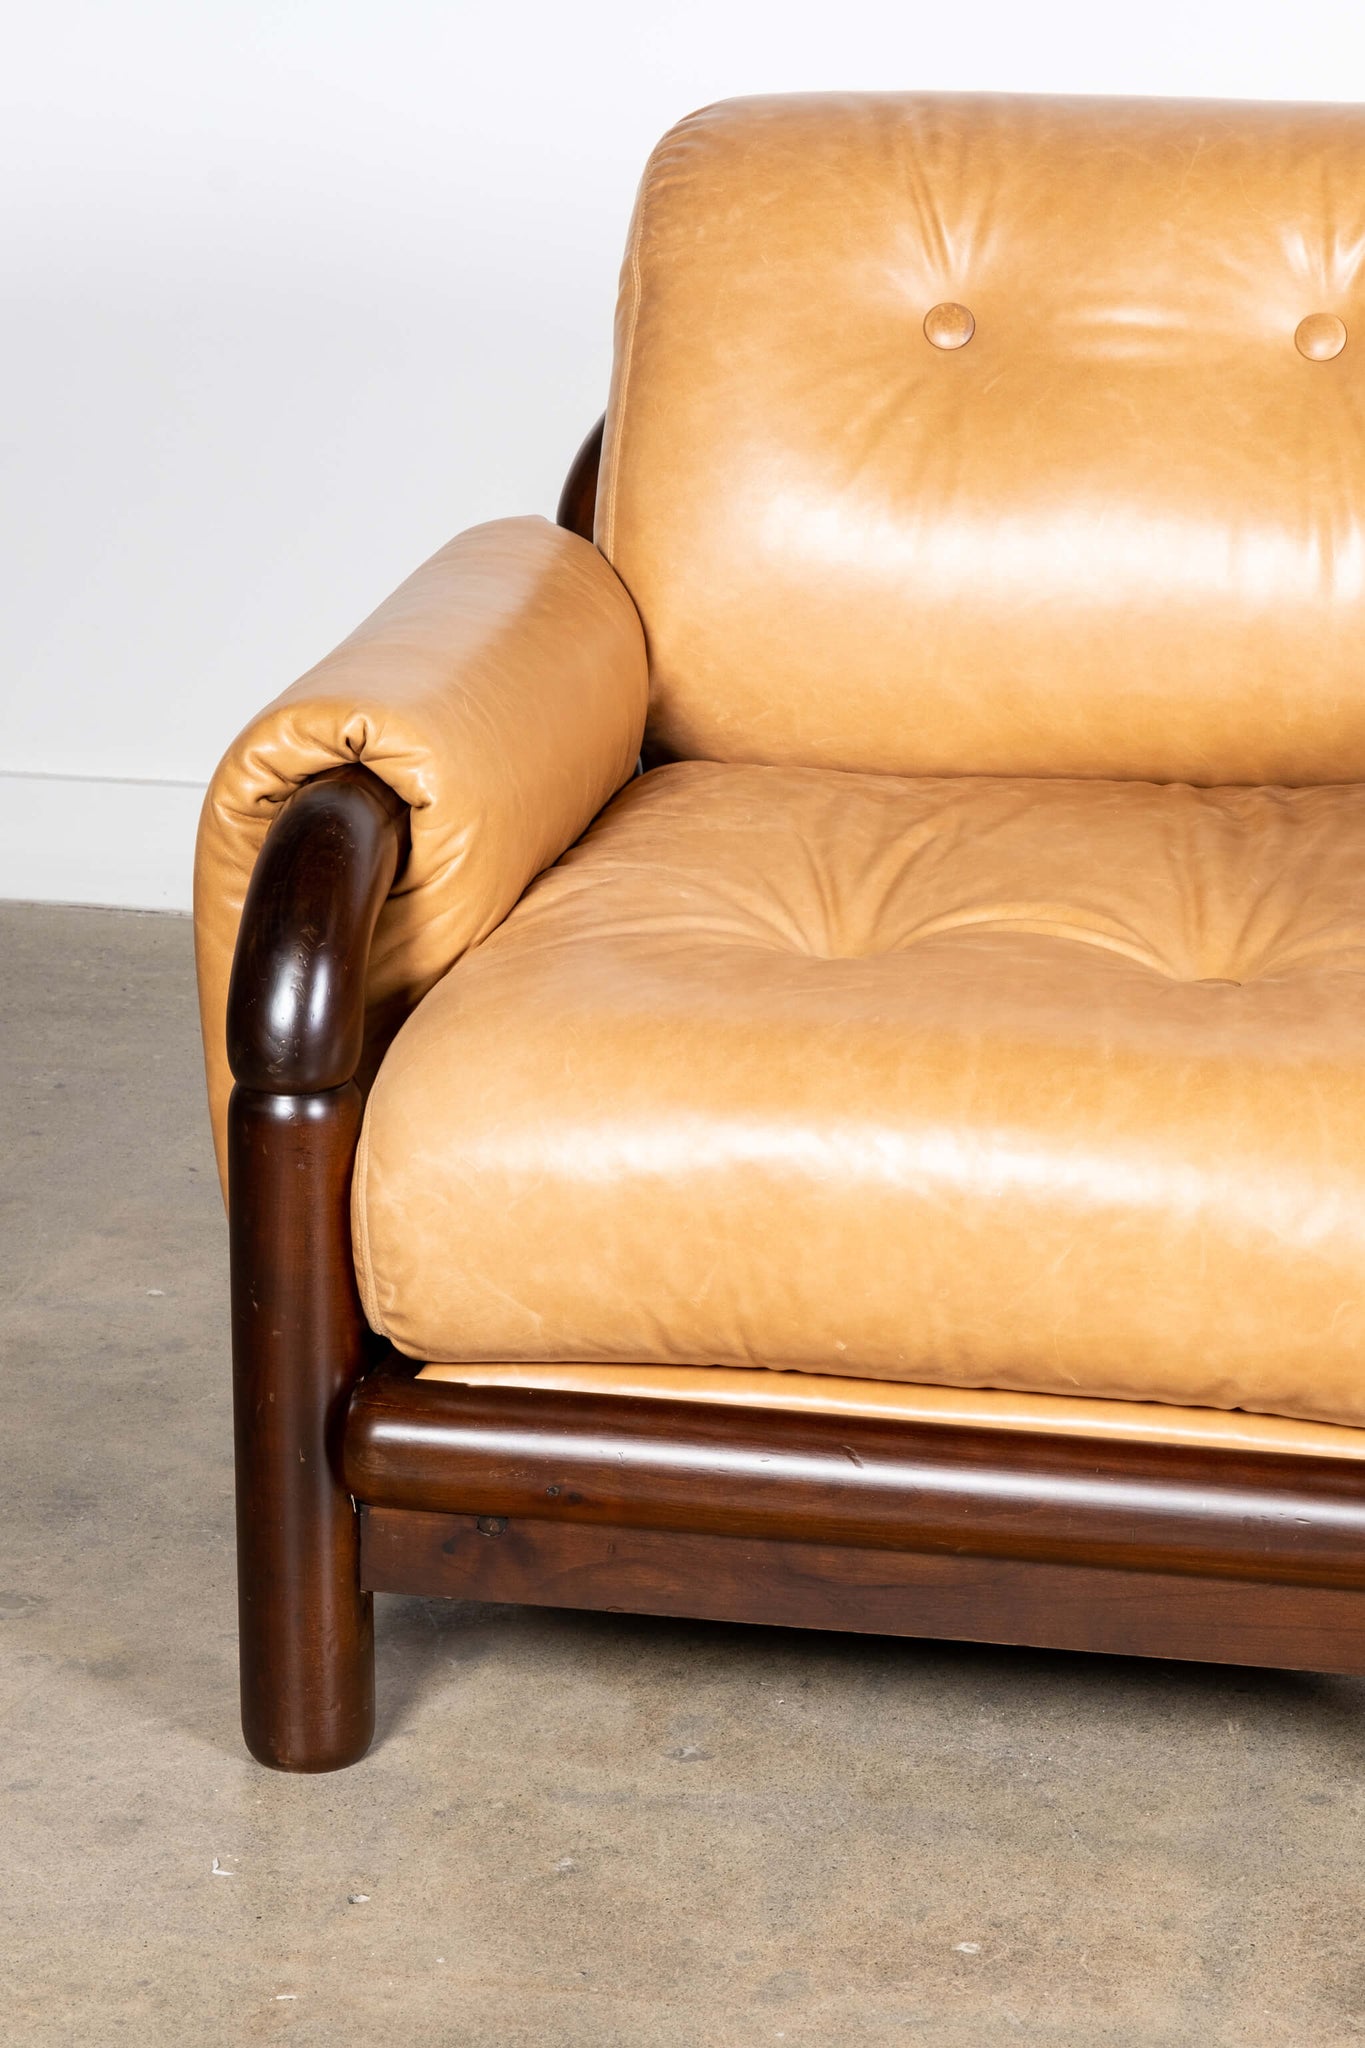 Pair of Brazilian Leather Armchairs